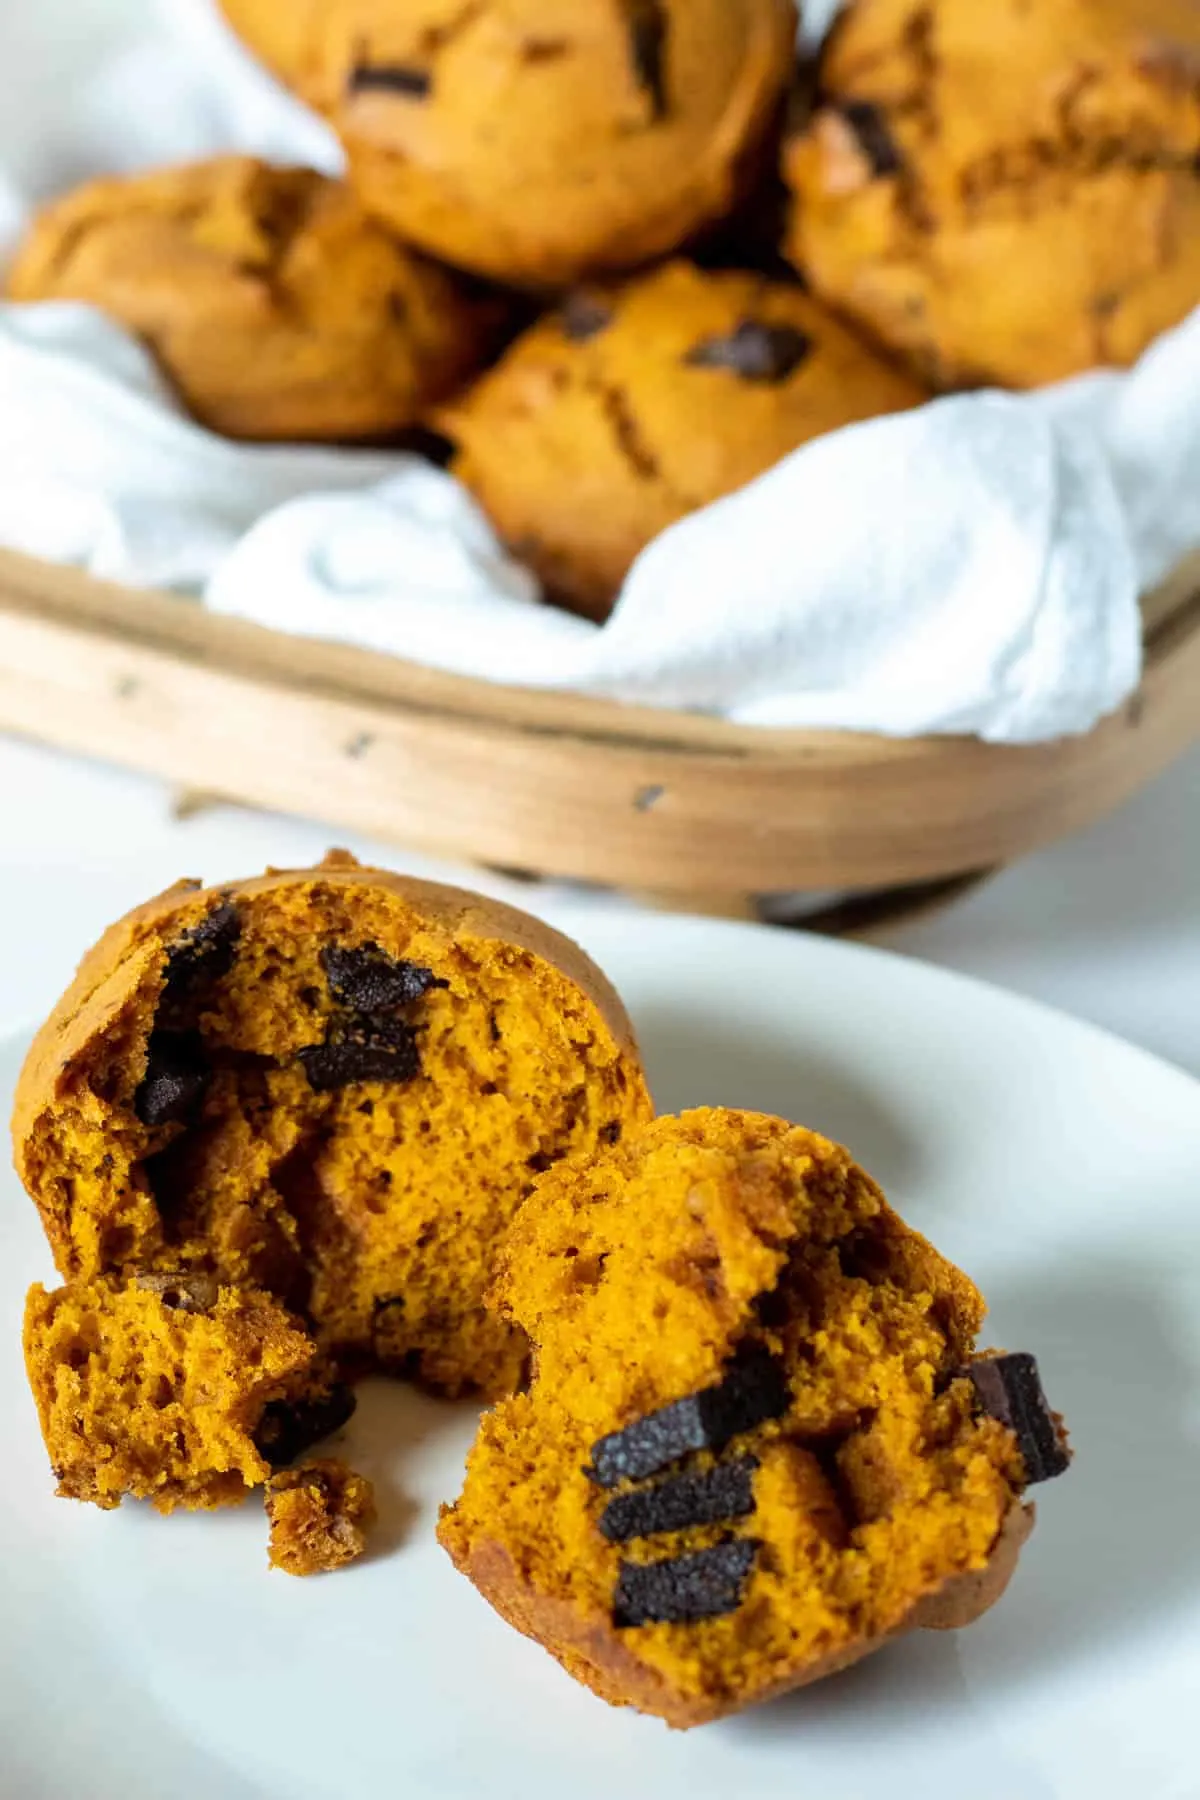 Pumpkin chocolate chip muffin on white plate with basket in background.